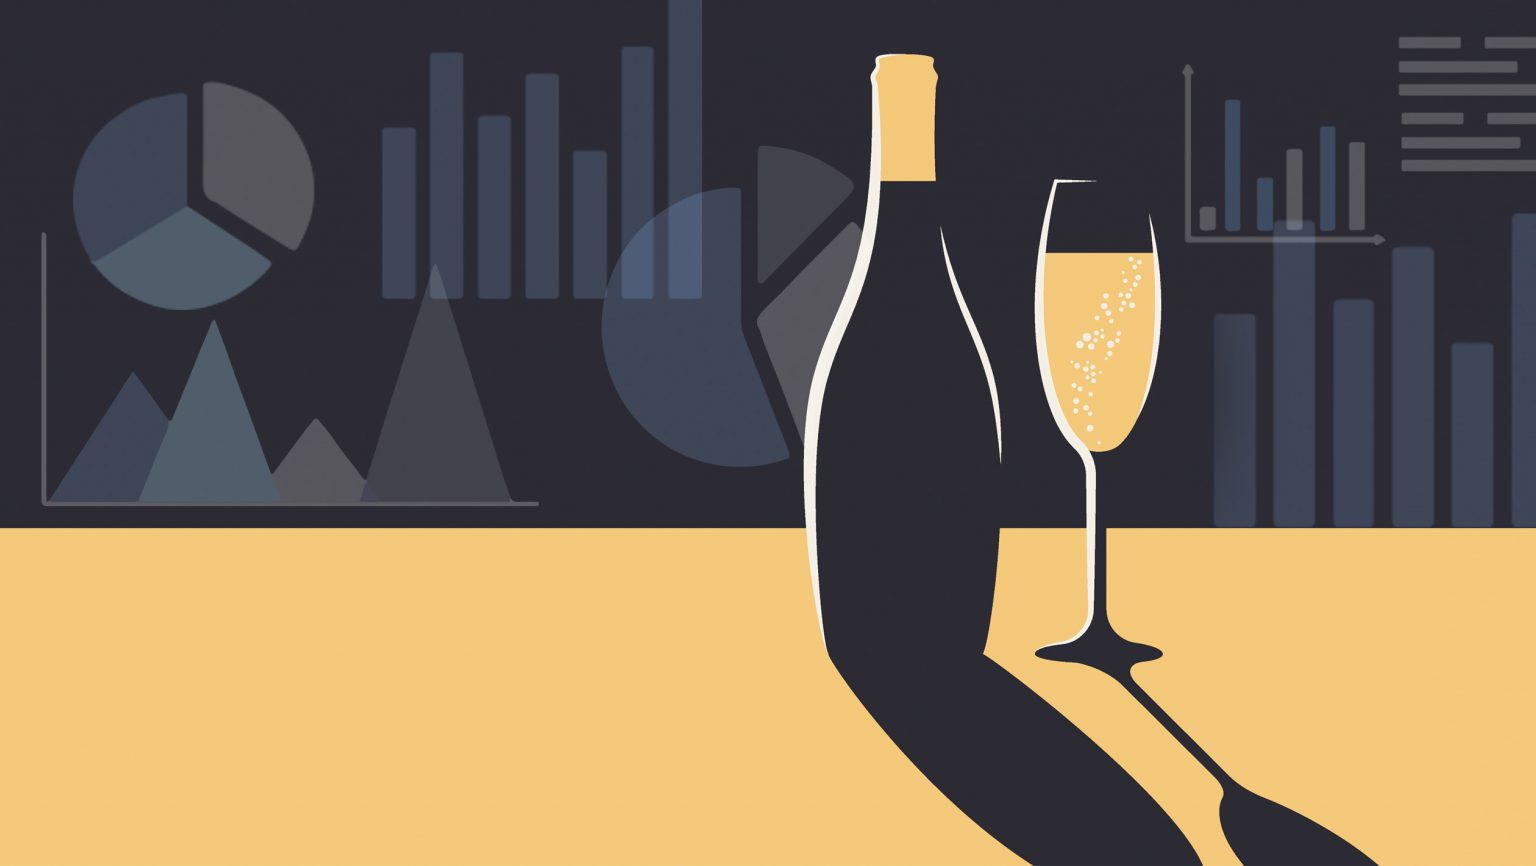 Champagne shortage 2021: Some higher-end brands like Moet and